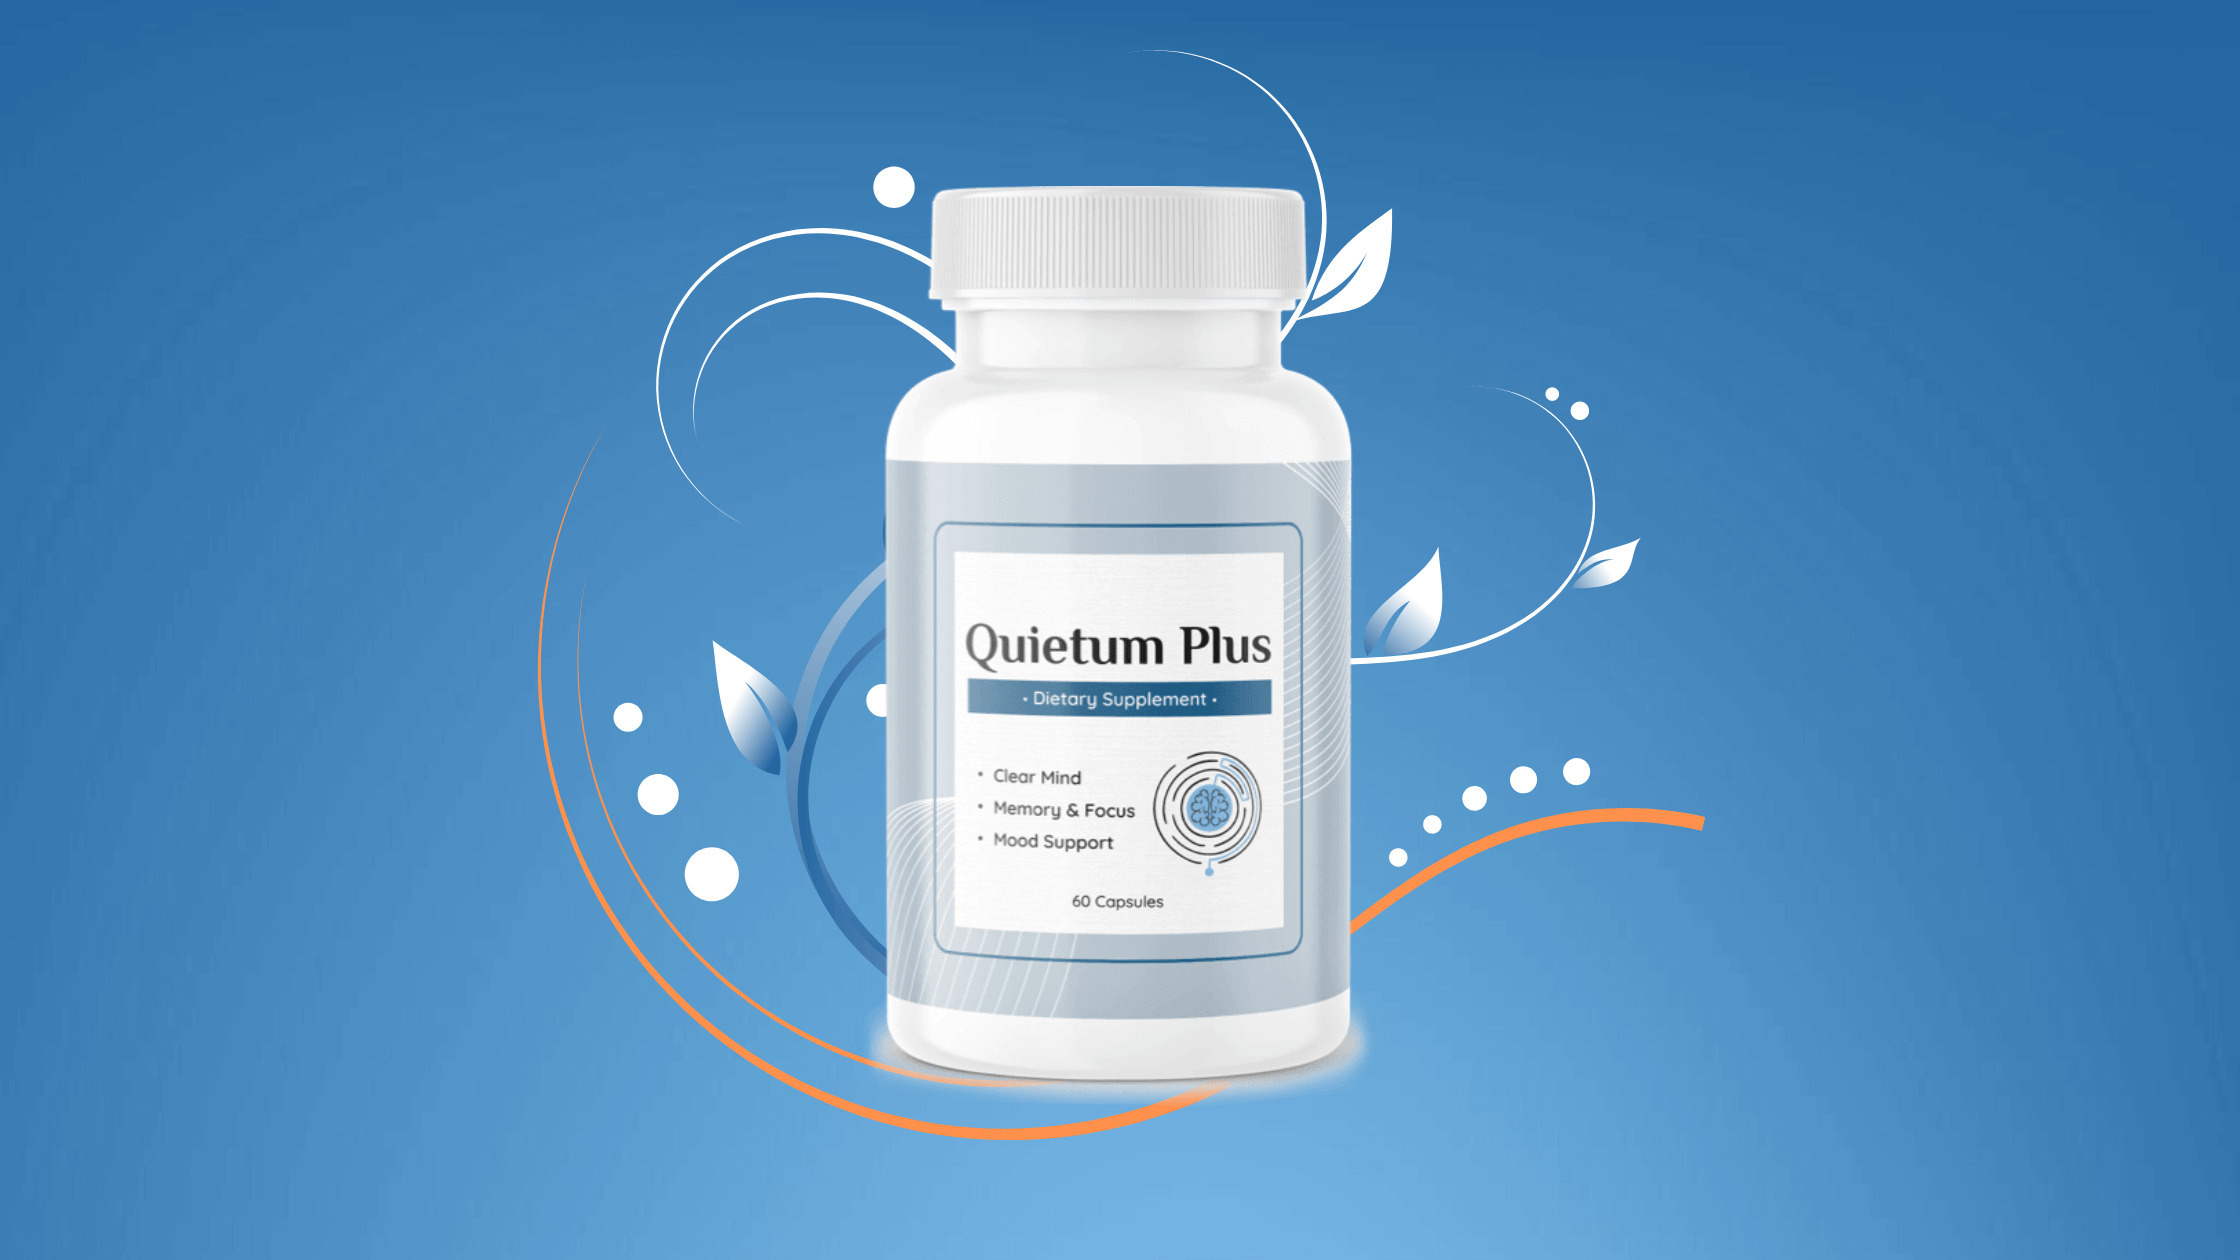 Quietum Plus Reviews Exposed: Is It a Legit Hearing Support Supplement or Just Hype?